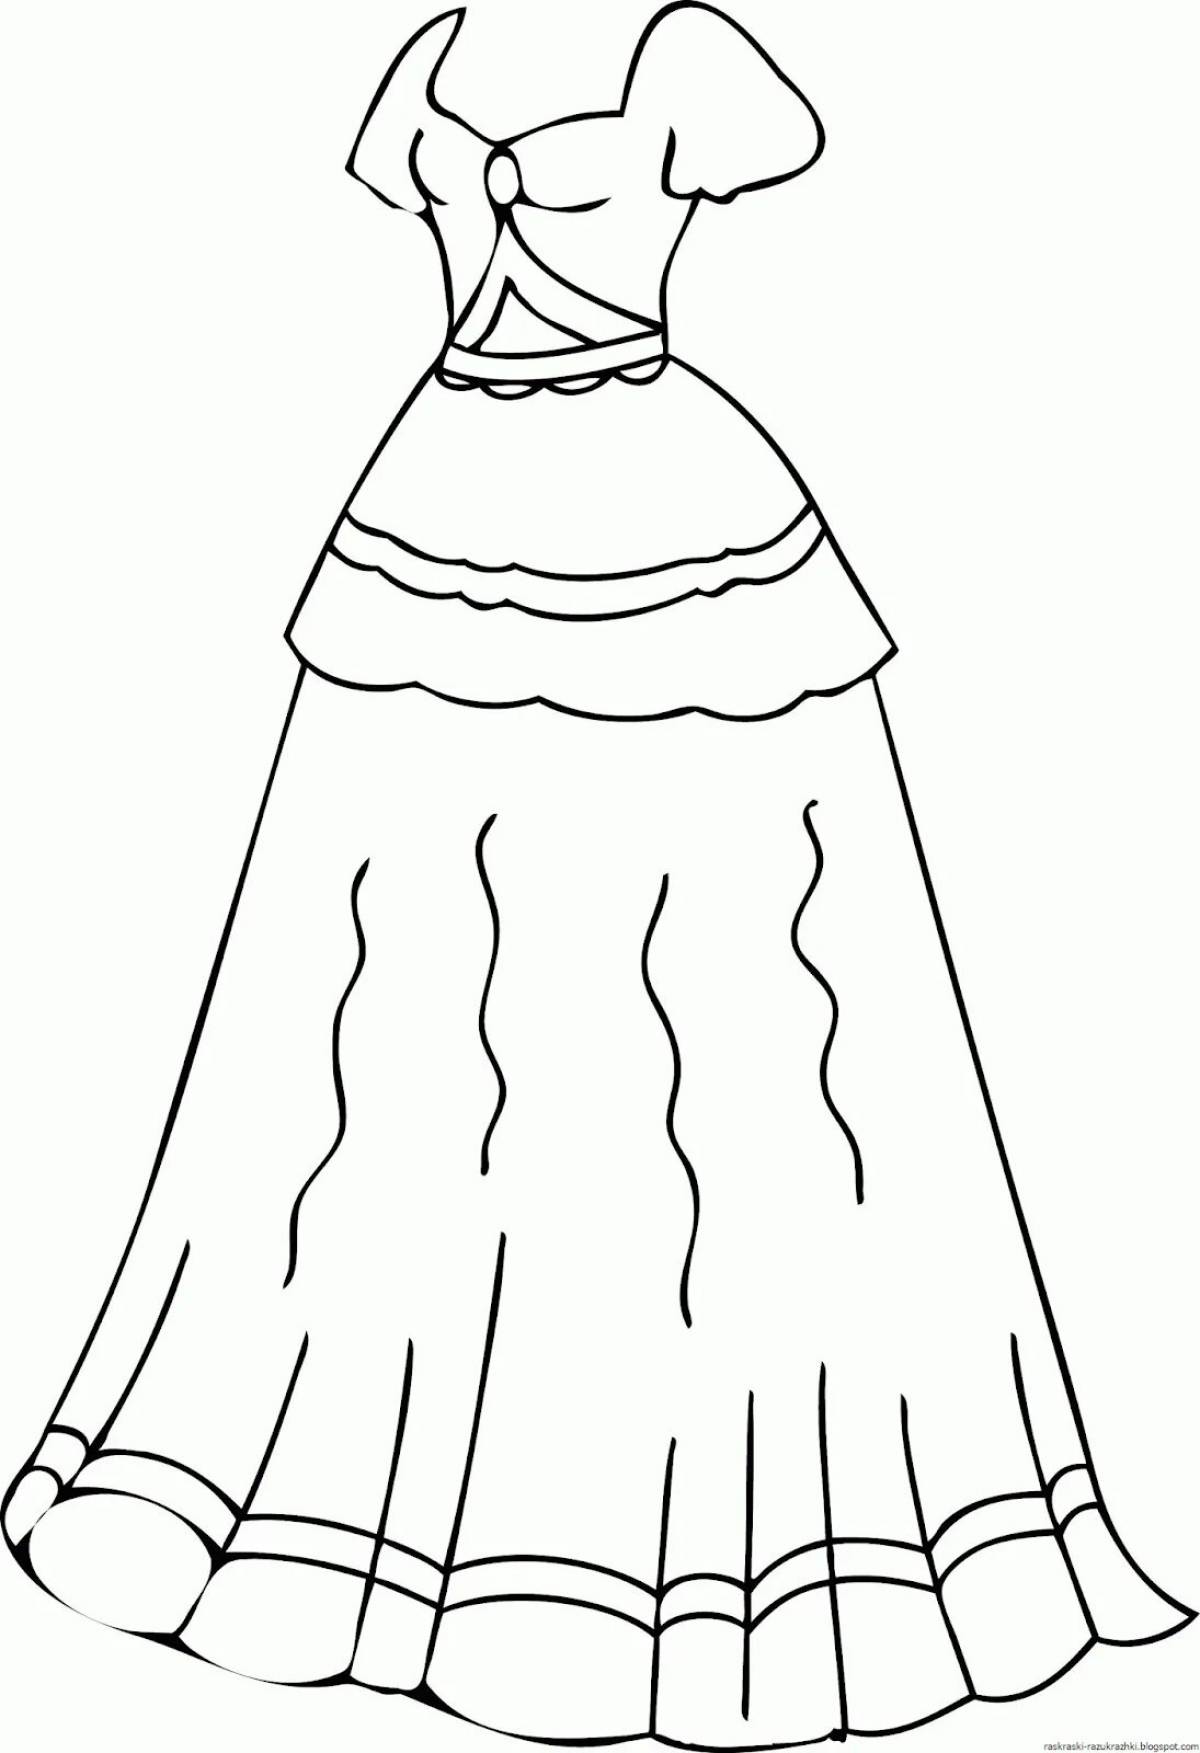 Dress drawing for children #3